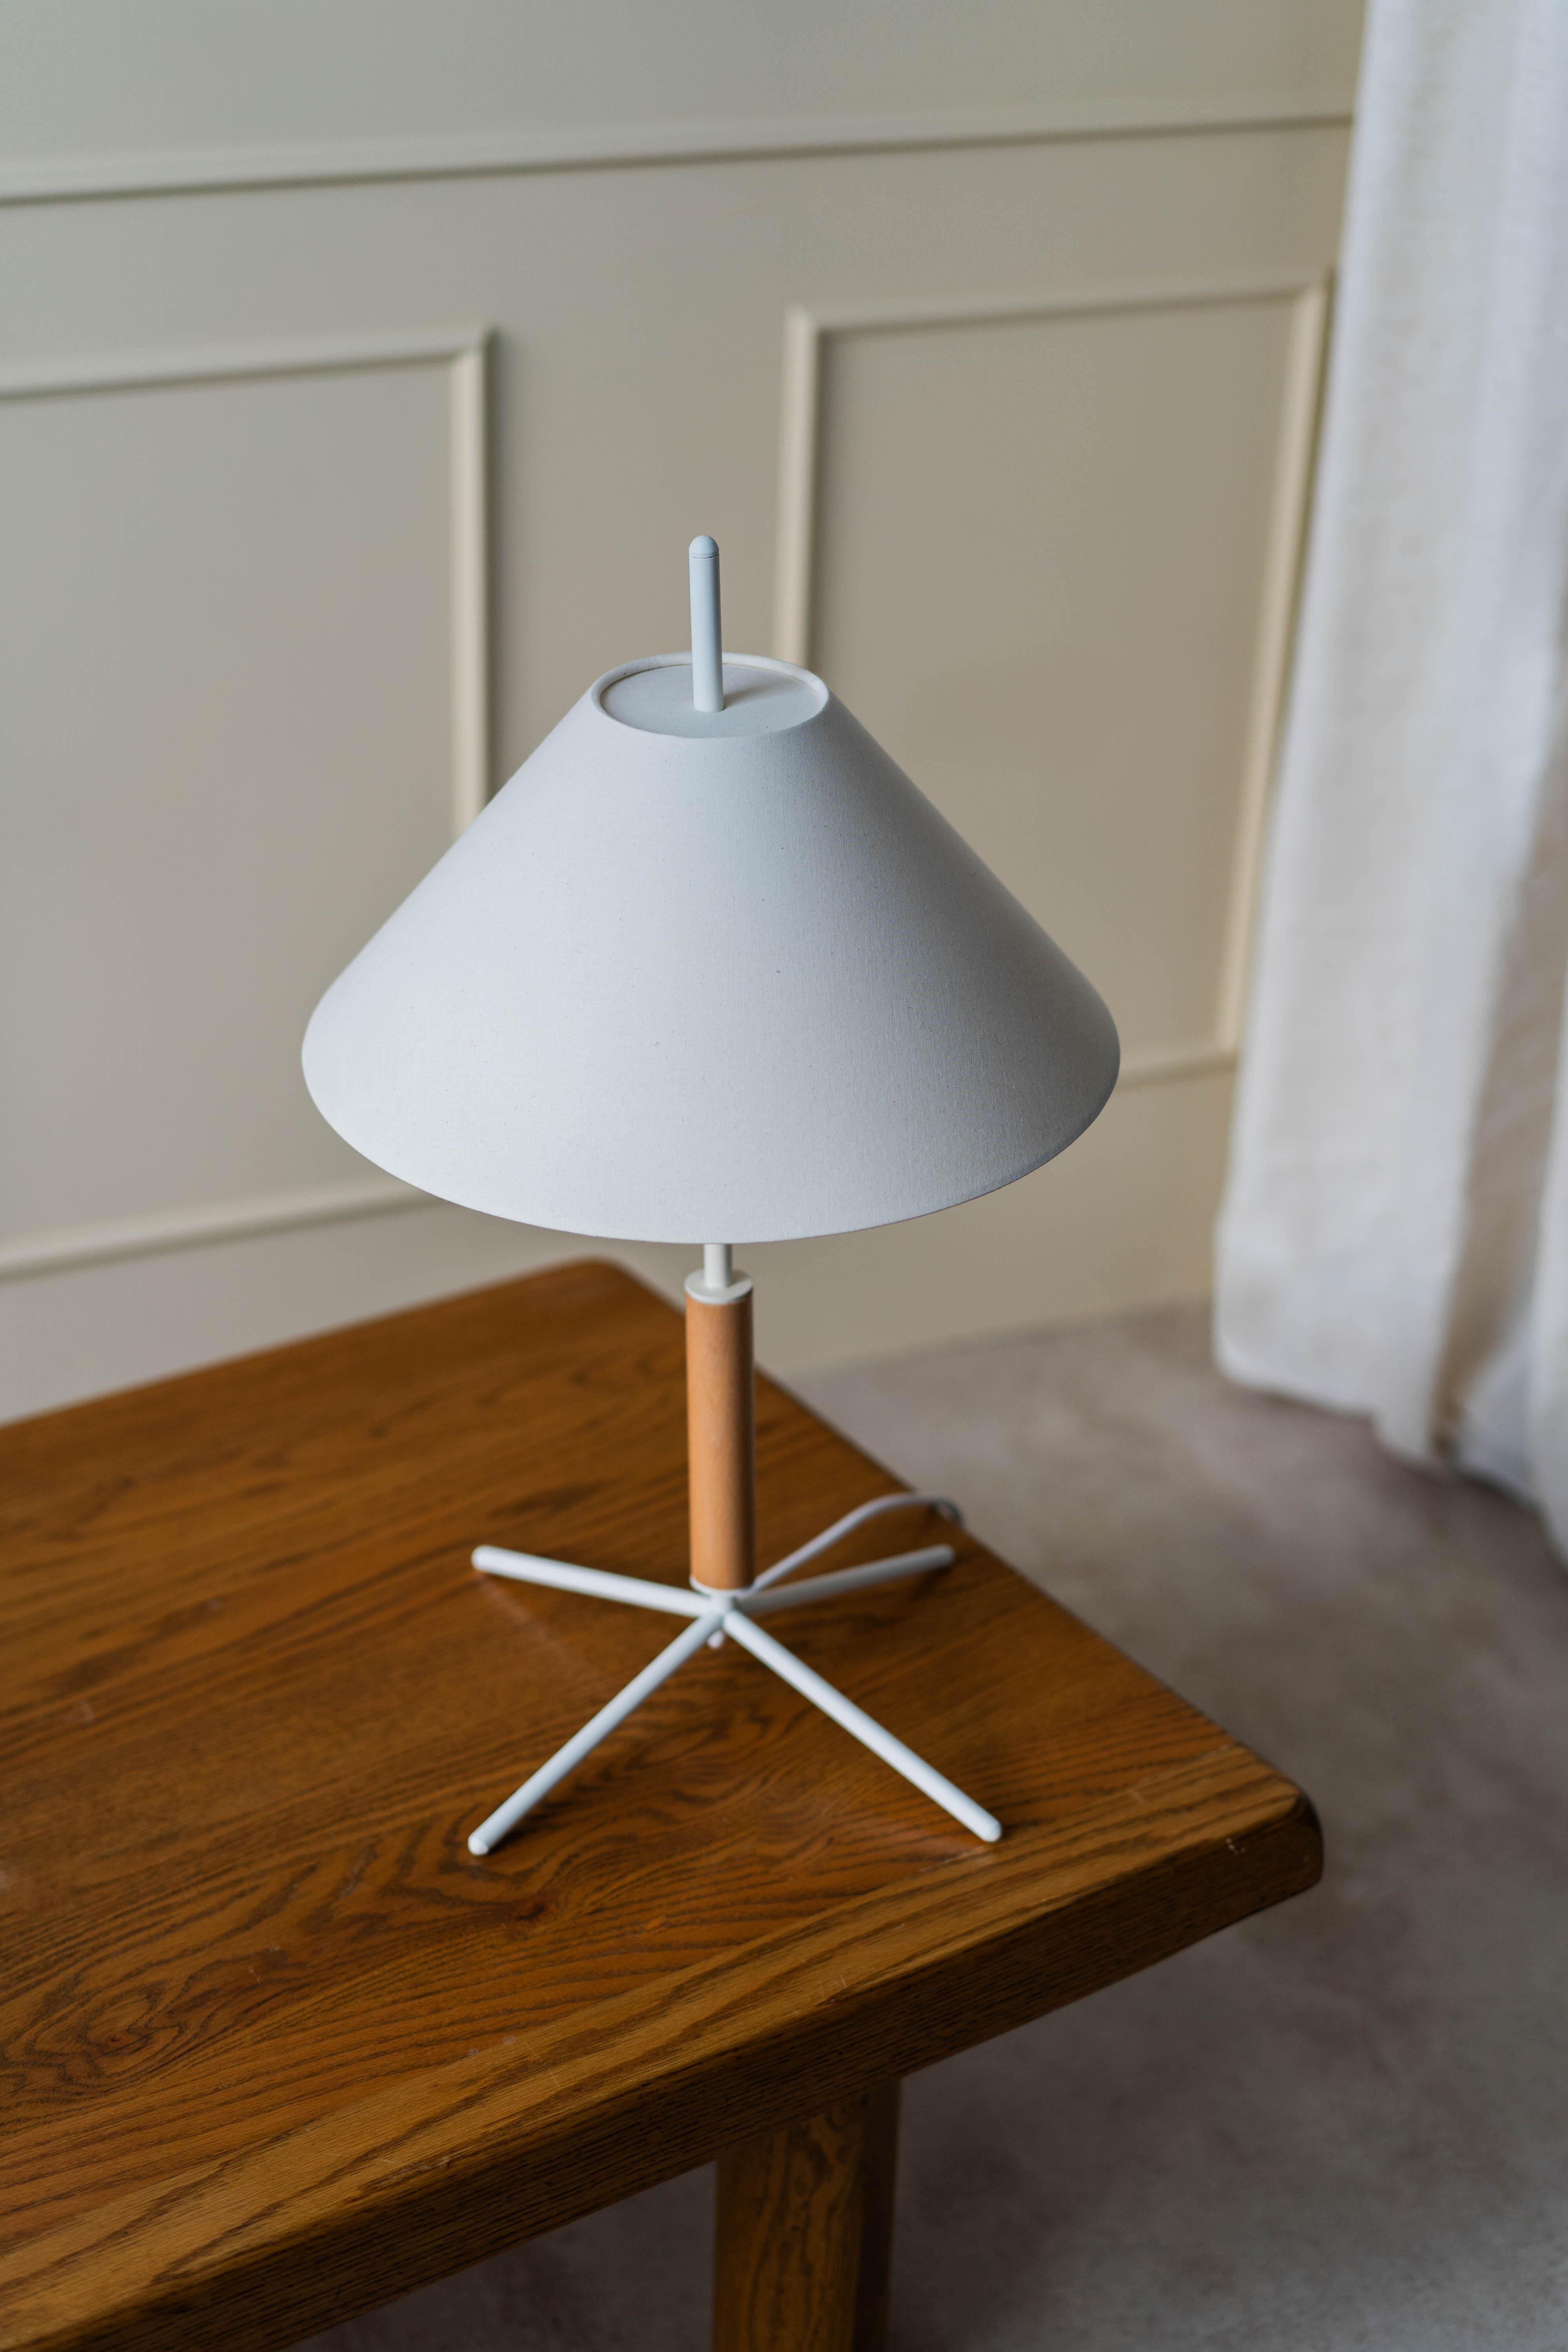 The VOL table lamp has a simple combination of lines and volumes, which create a geometric sculptural form, while being optimal in its shape for lighting spaces. 
It has a conical shade, a structure that combines metal with natural wood, and a